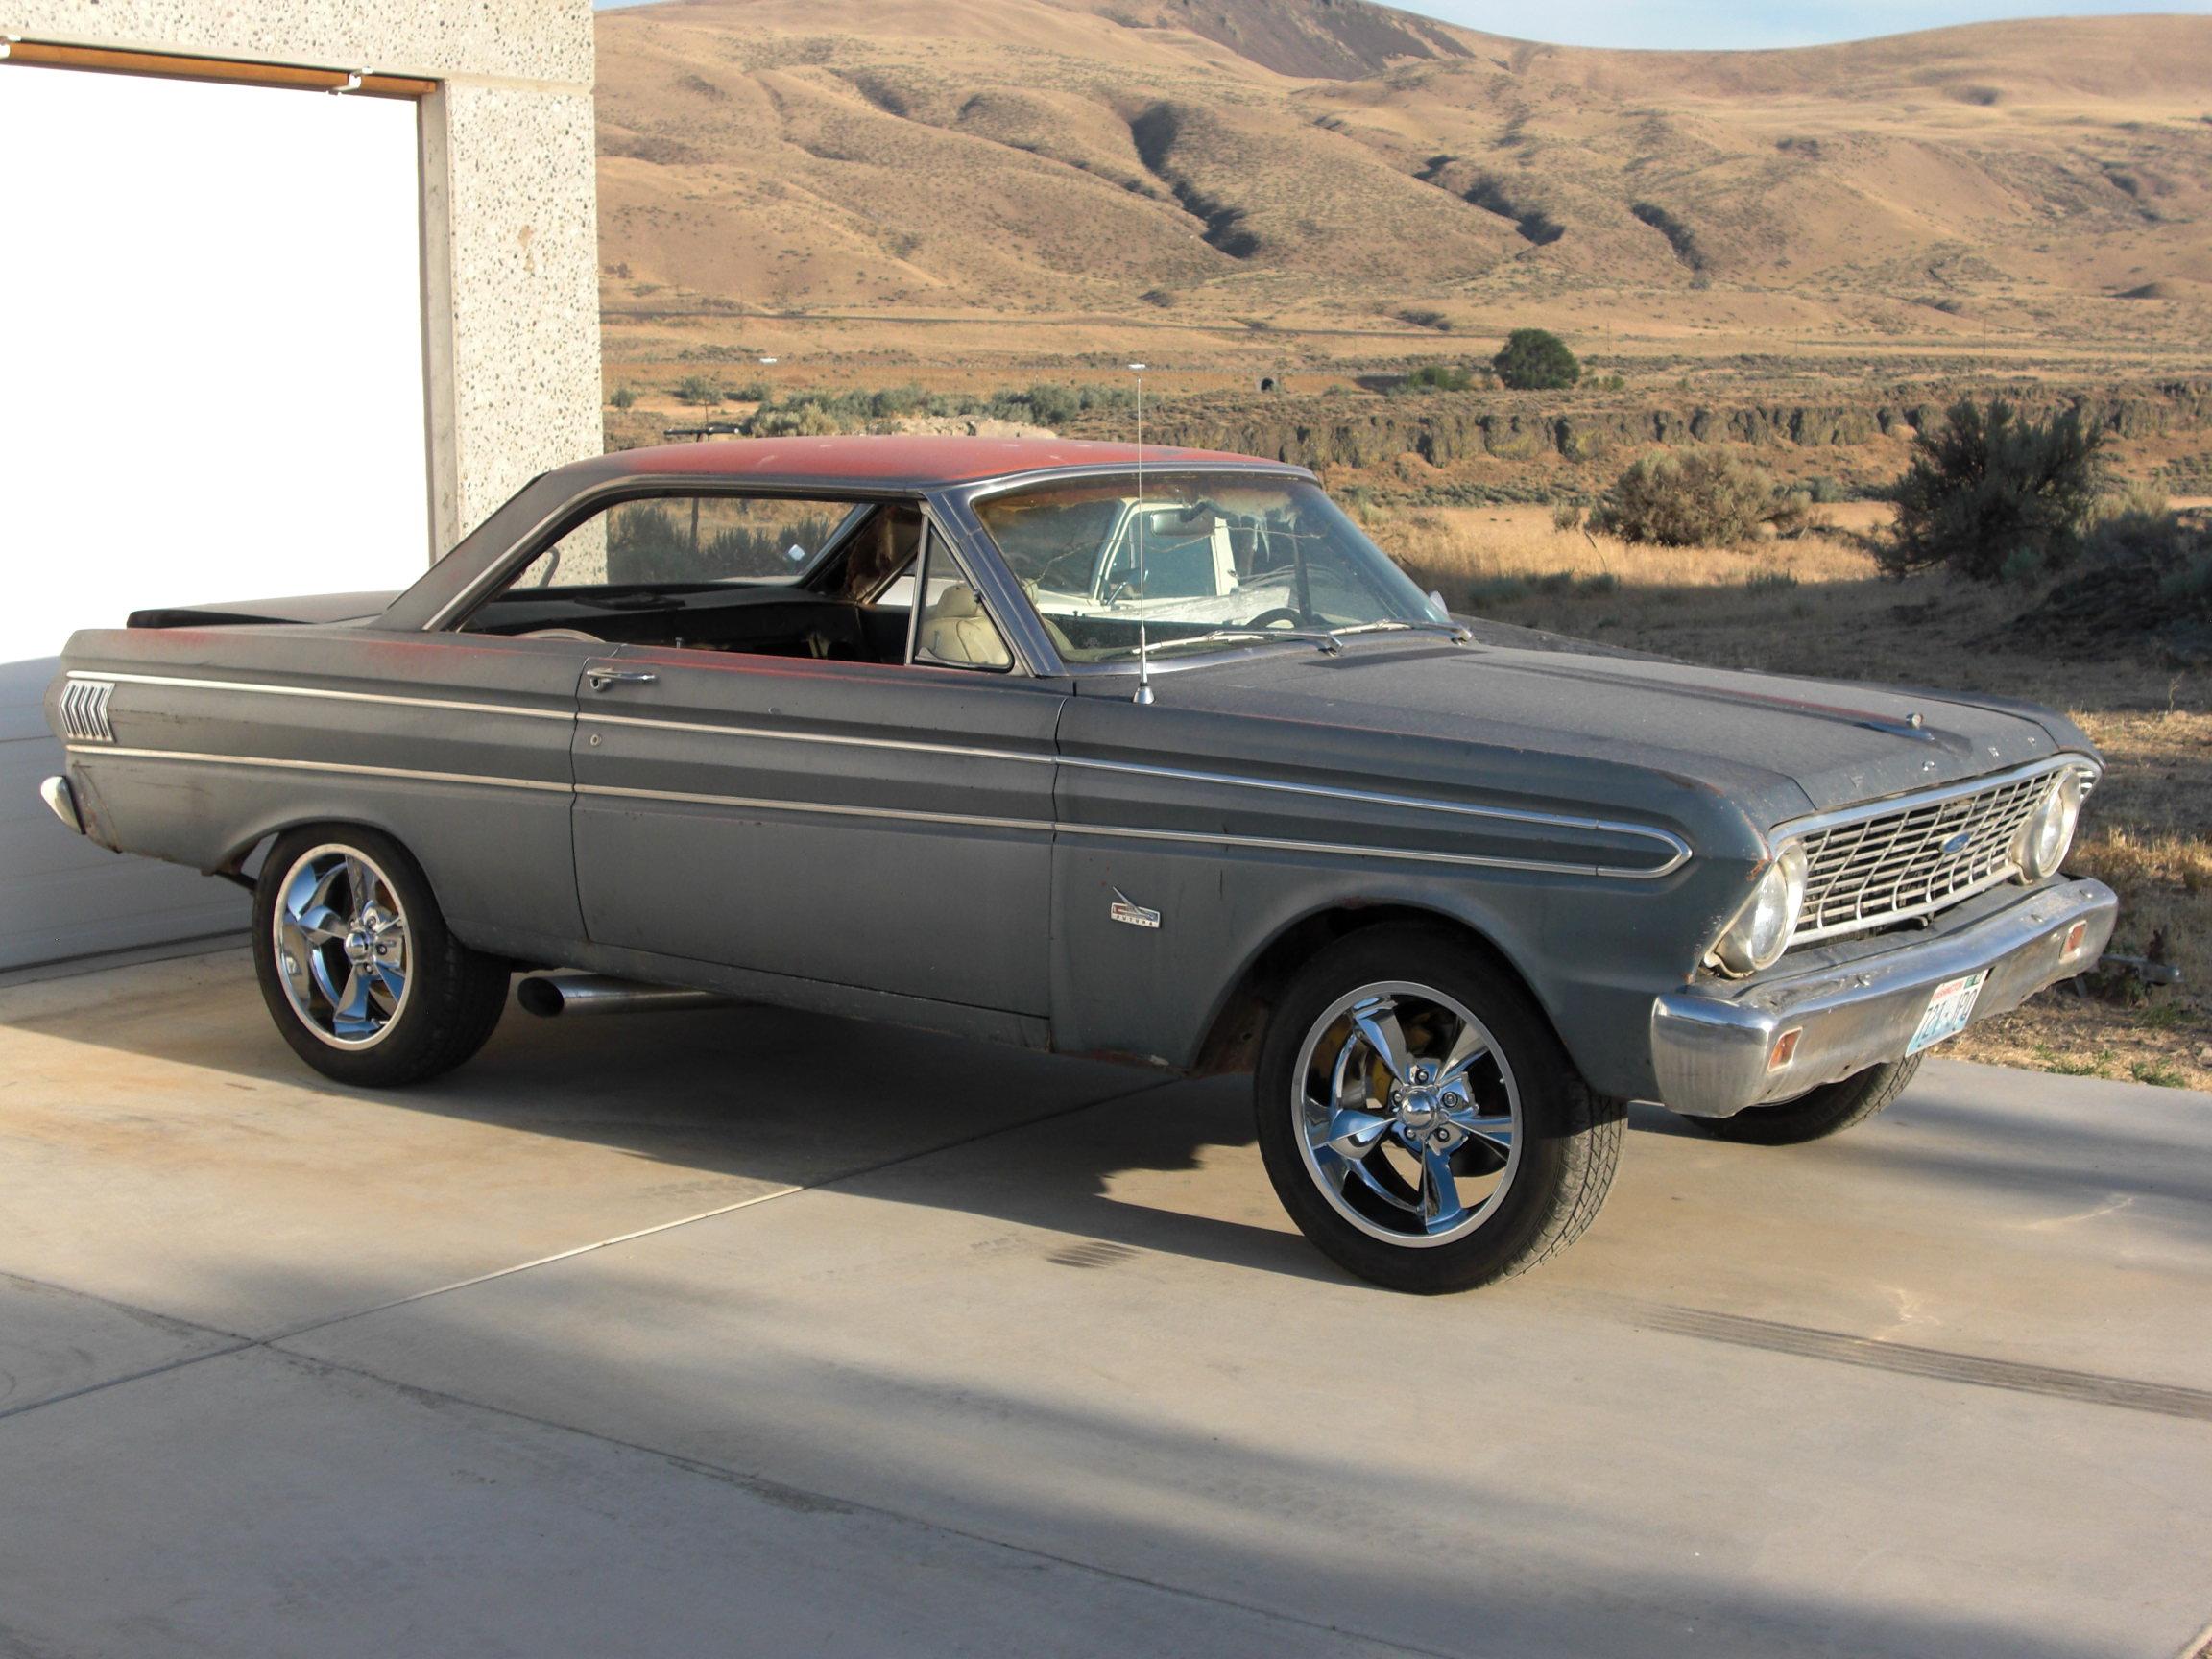 1964 Ford Falcon Pics, Vehicles Collection